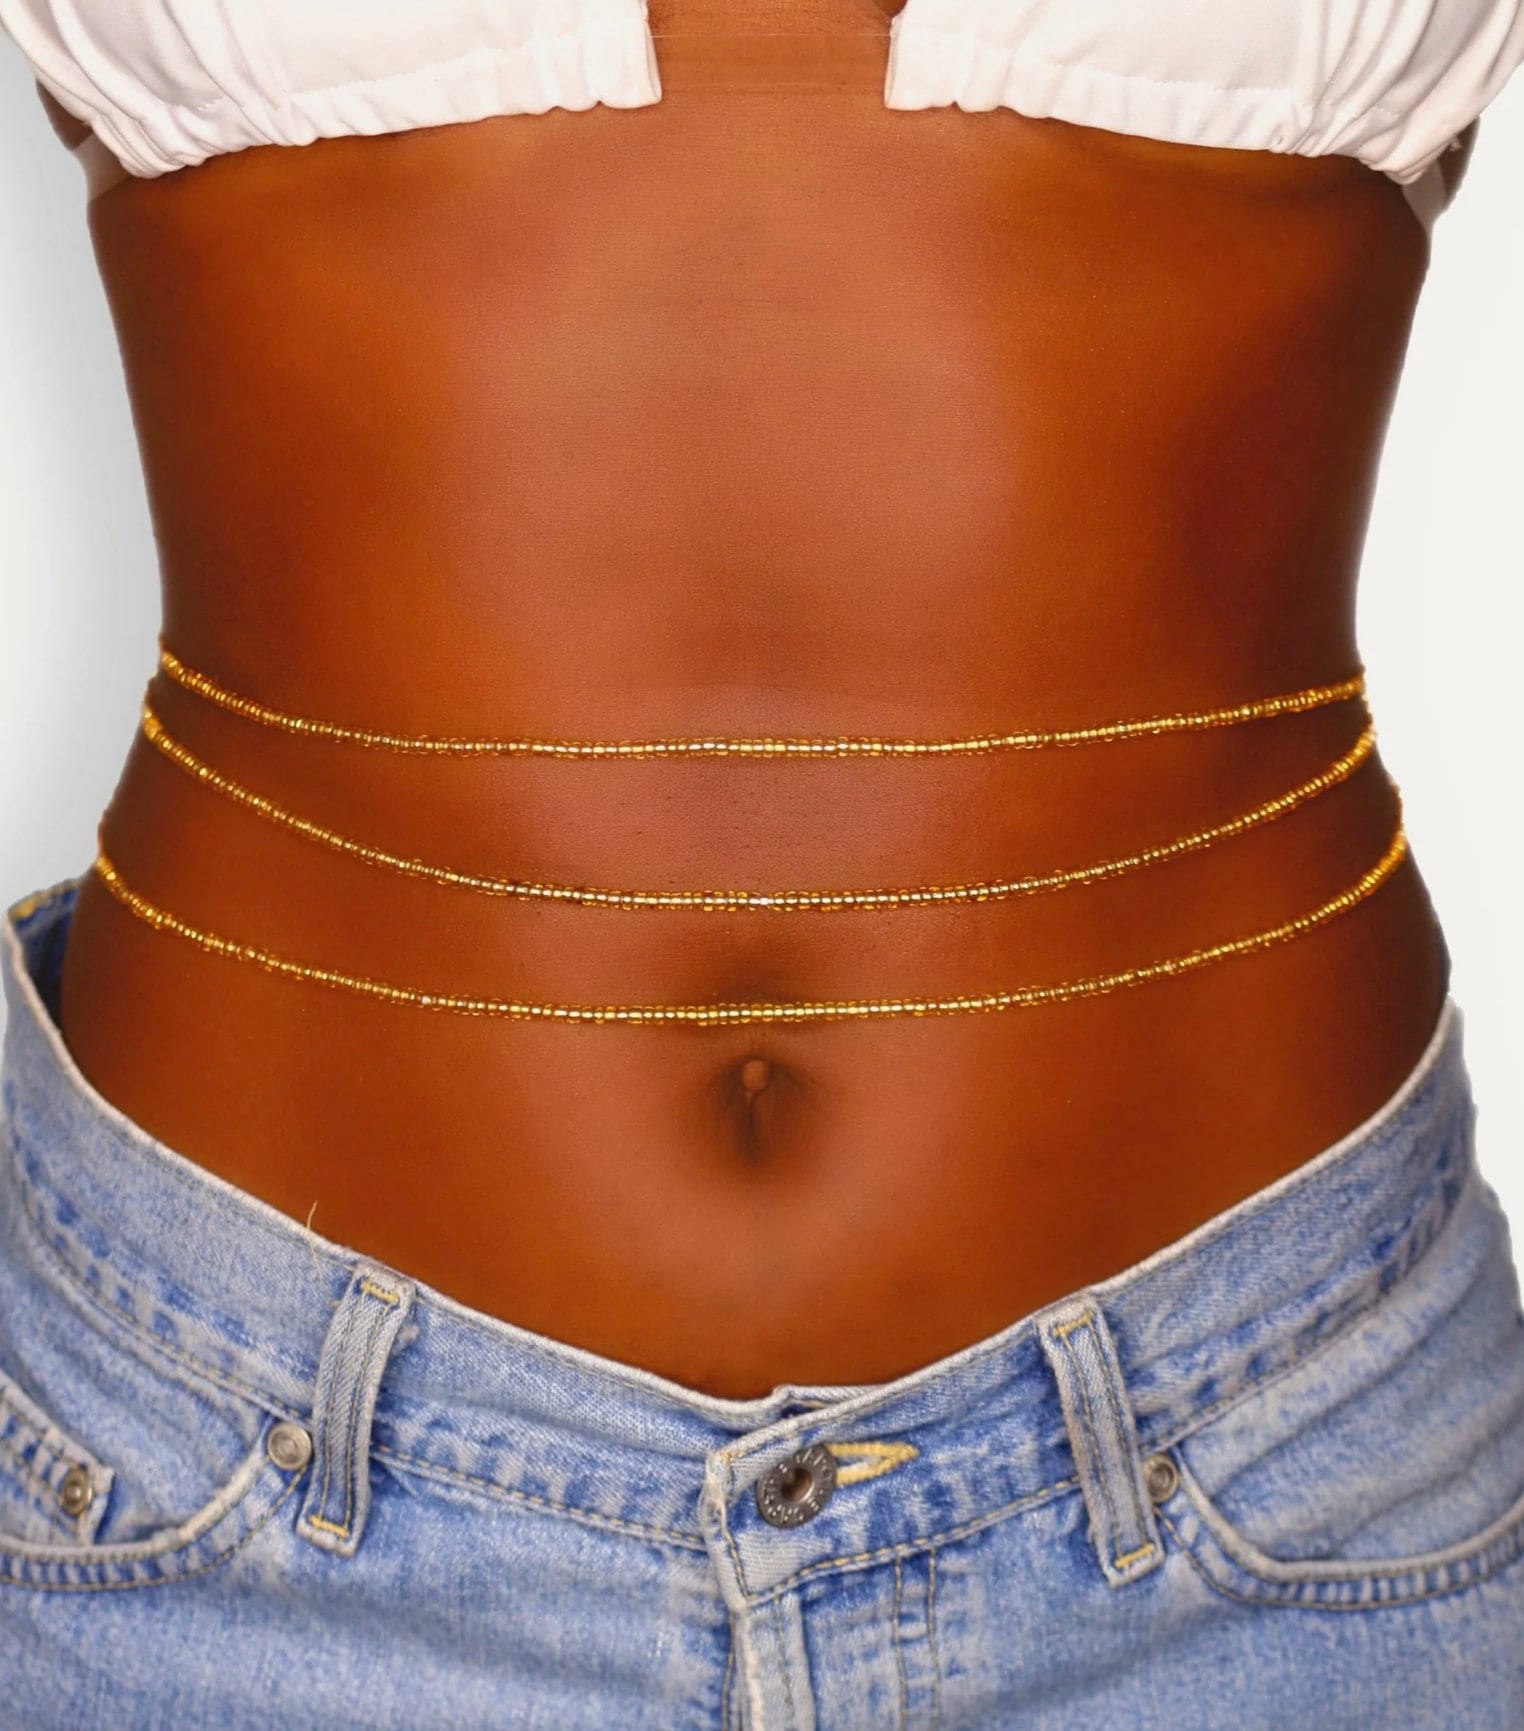 Set of Elastic African waist beads, Weight loss belly chain